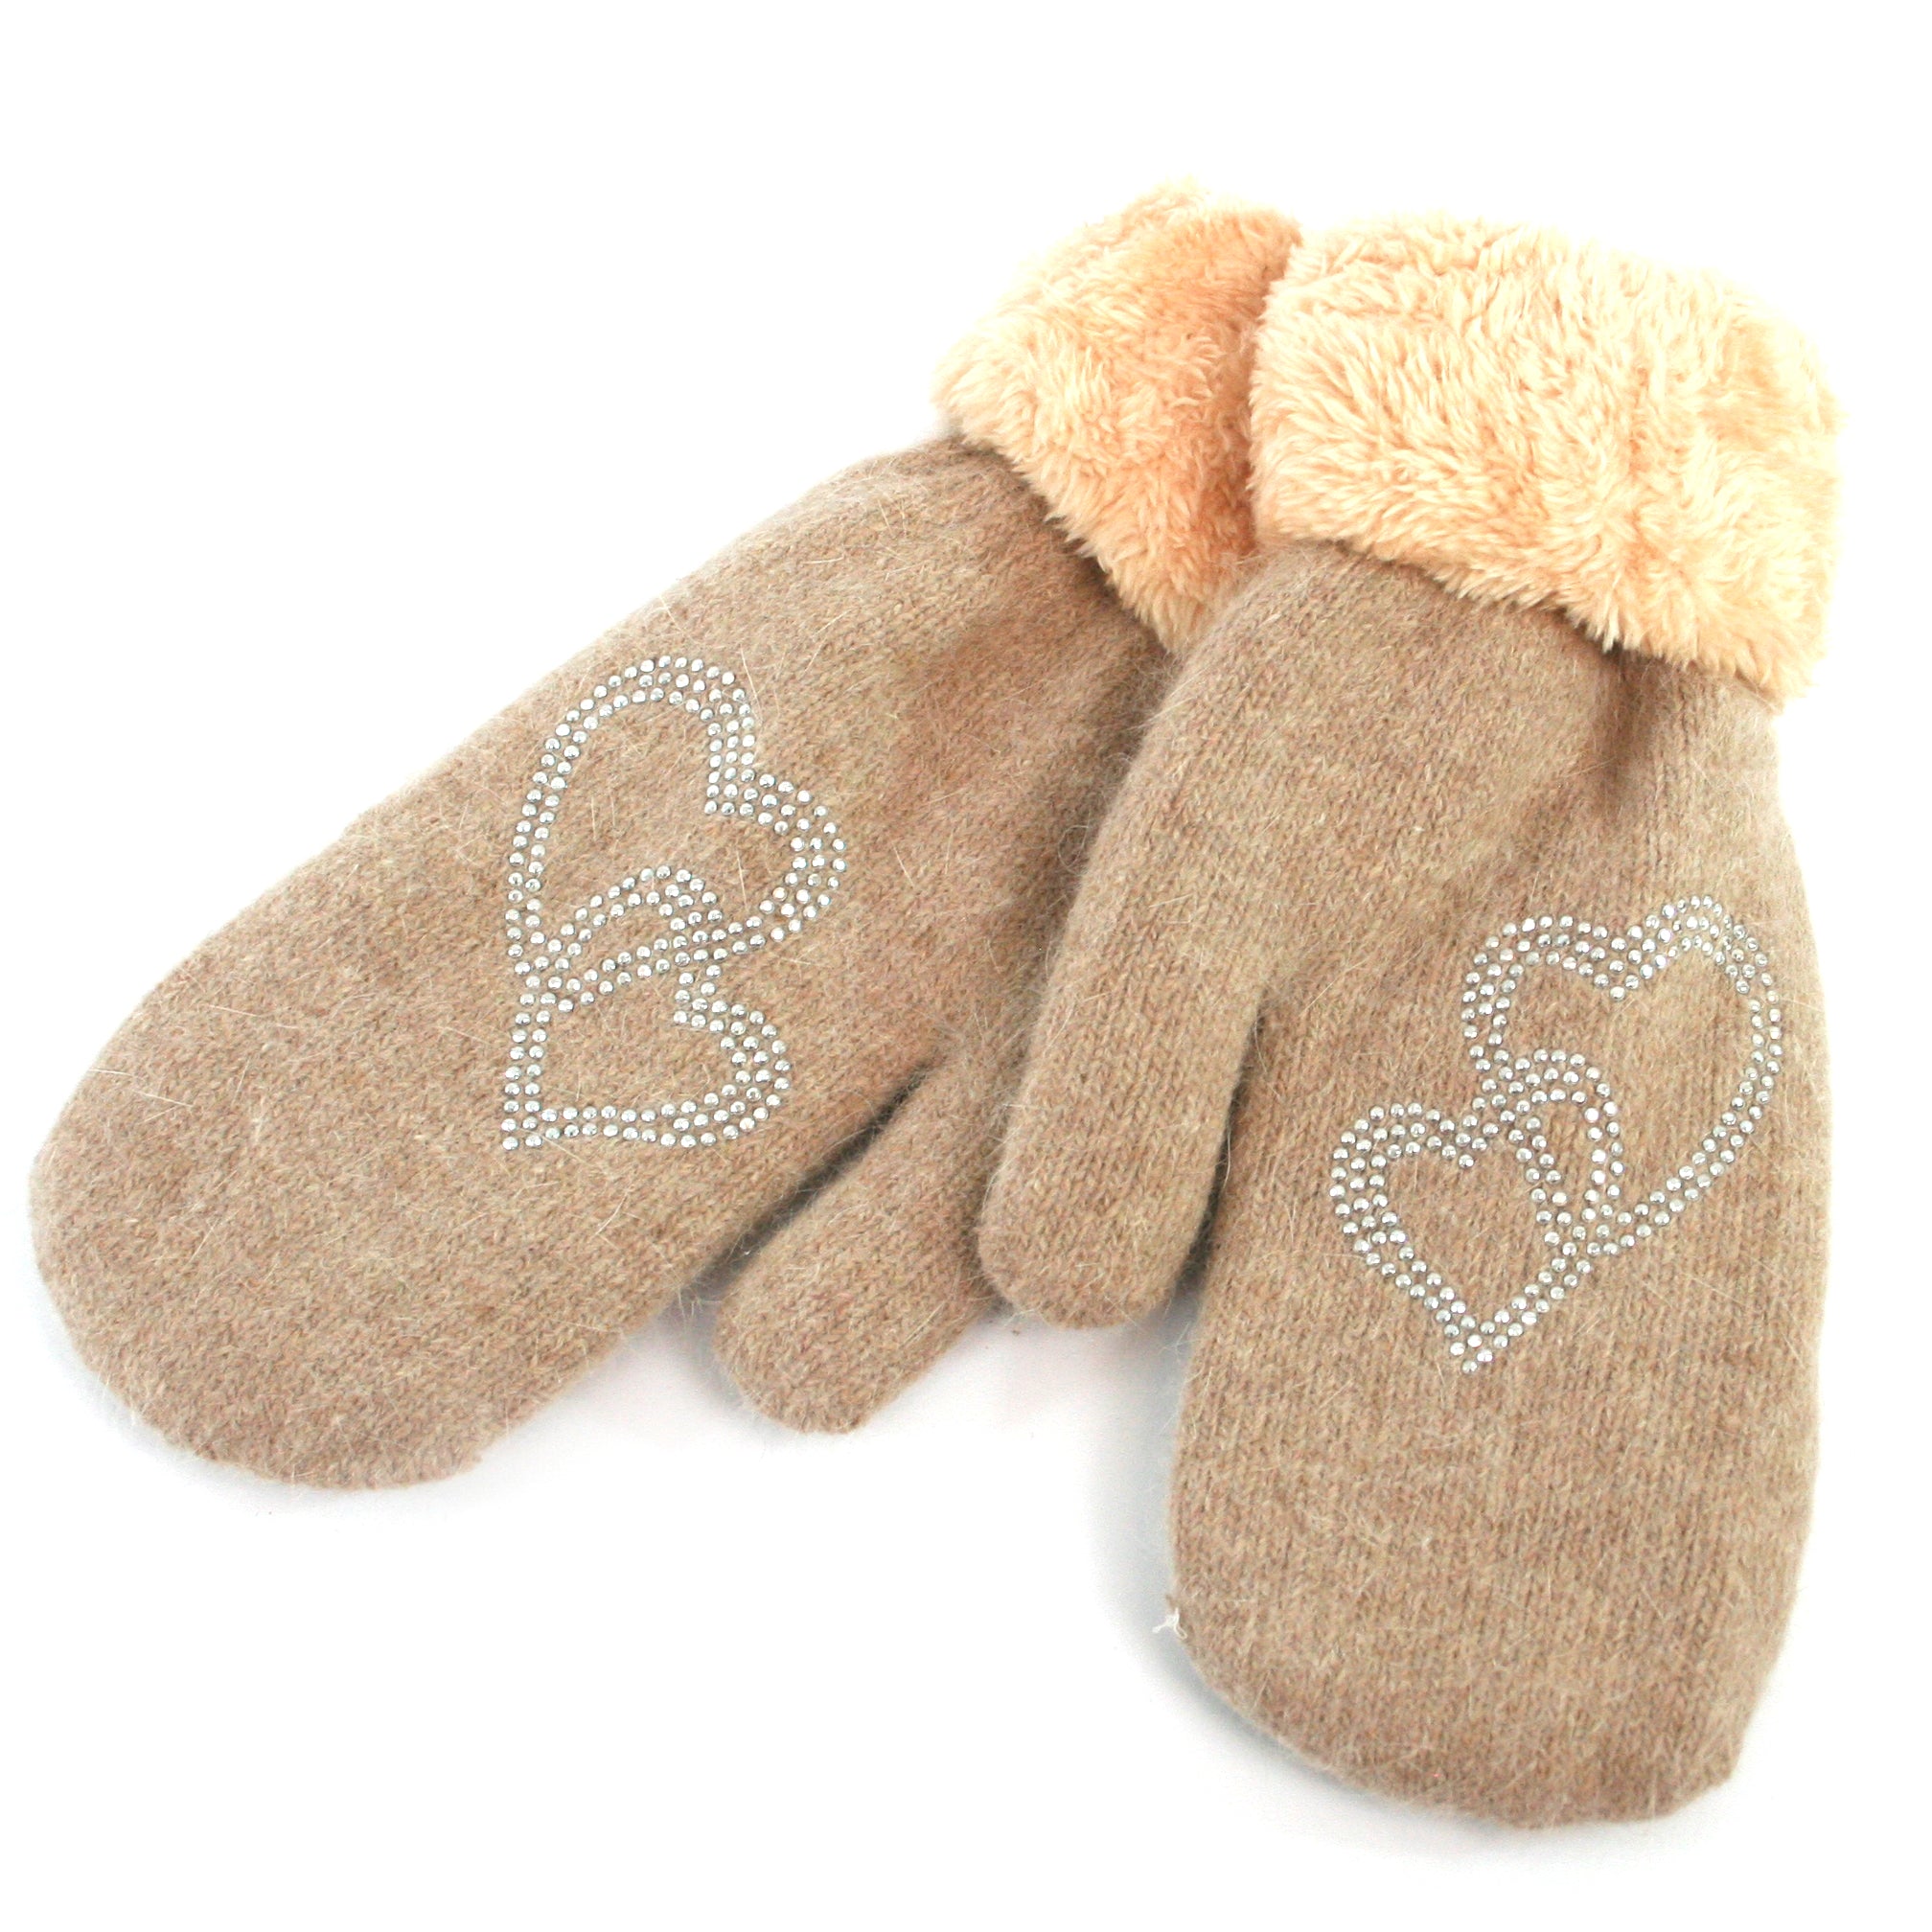 warm winter mittens with faux fur cuffs and lining with a heart design